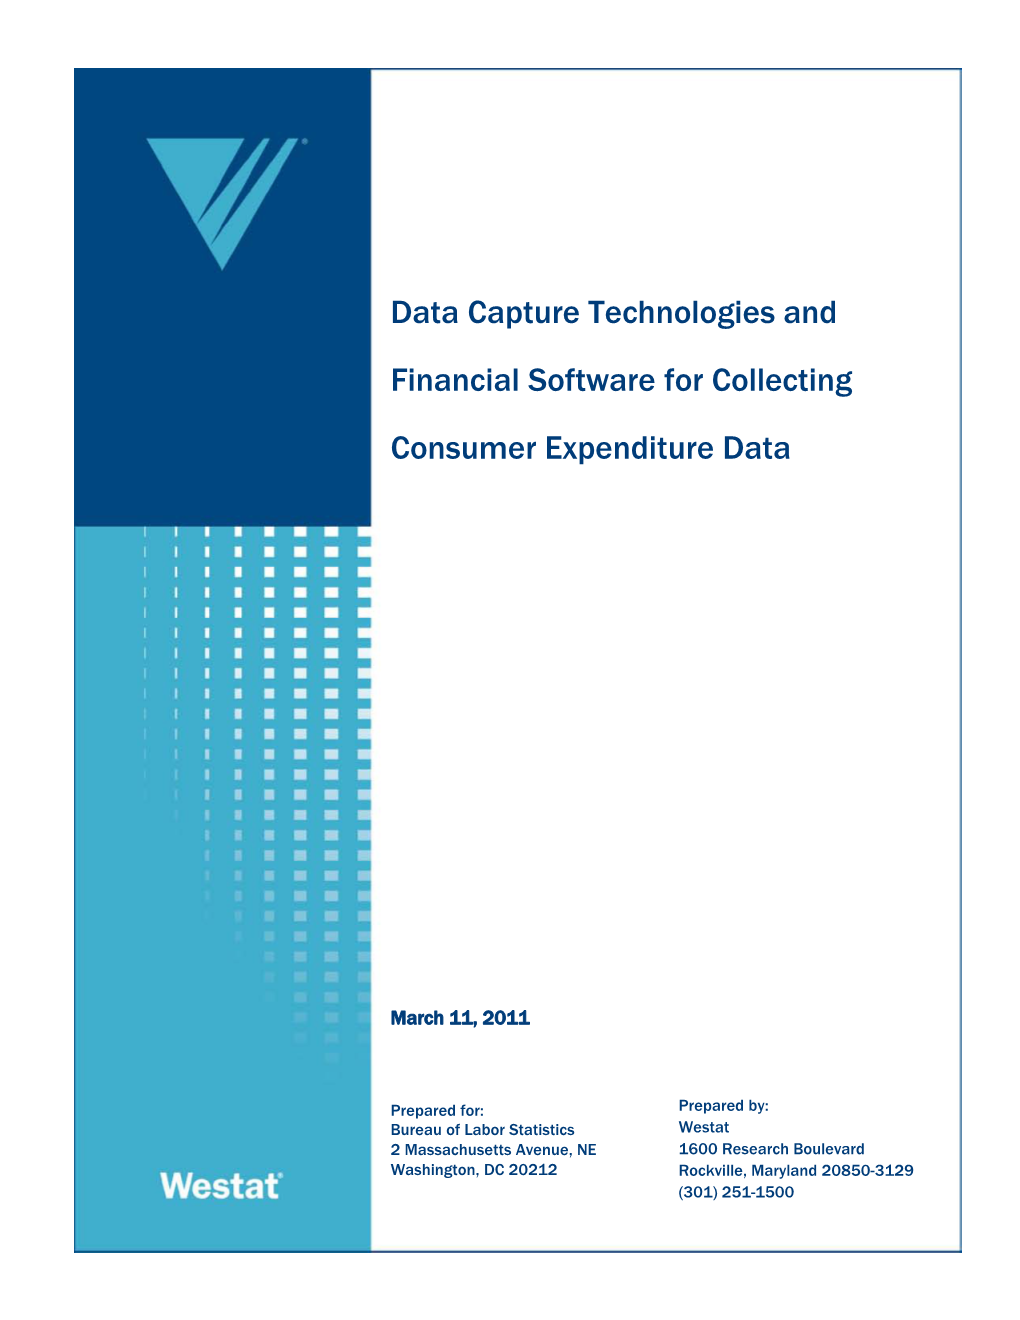 Data Capture Technologies and Financial Software for Collecting